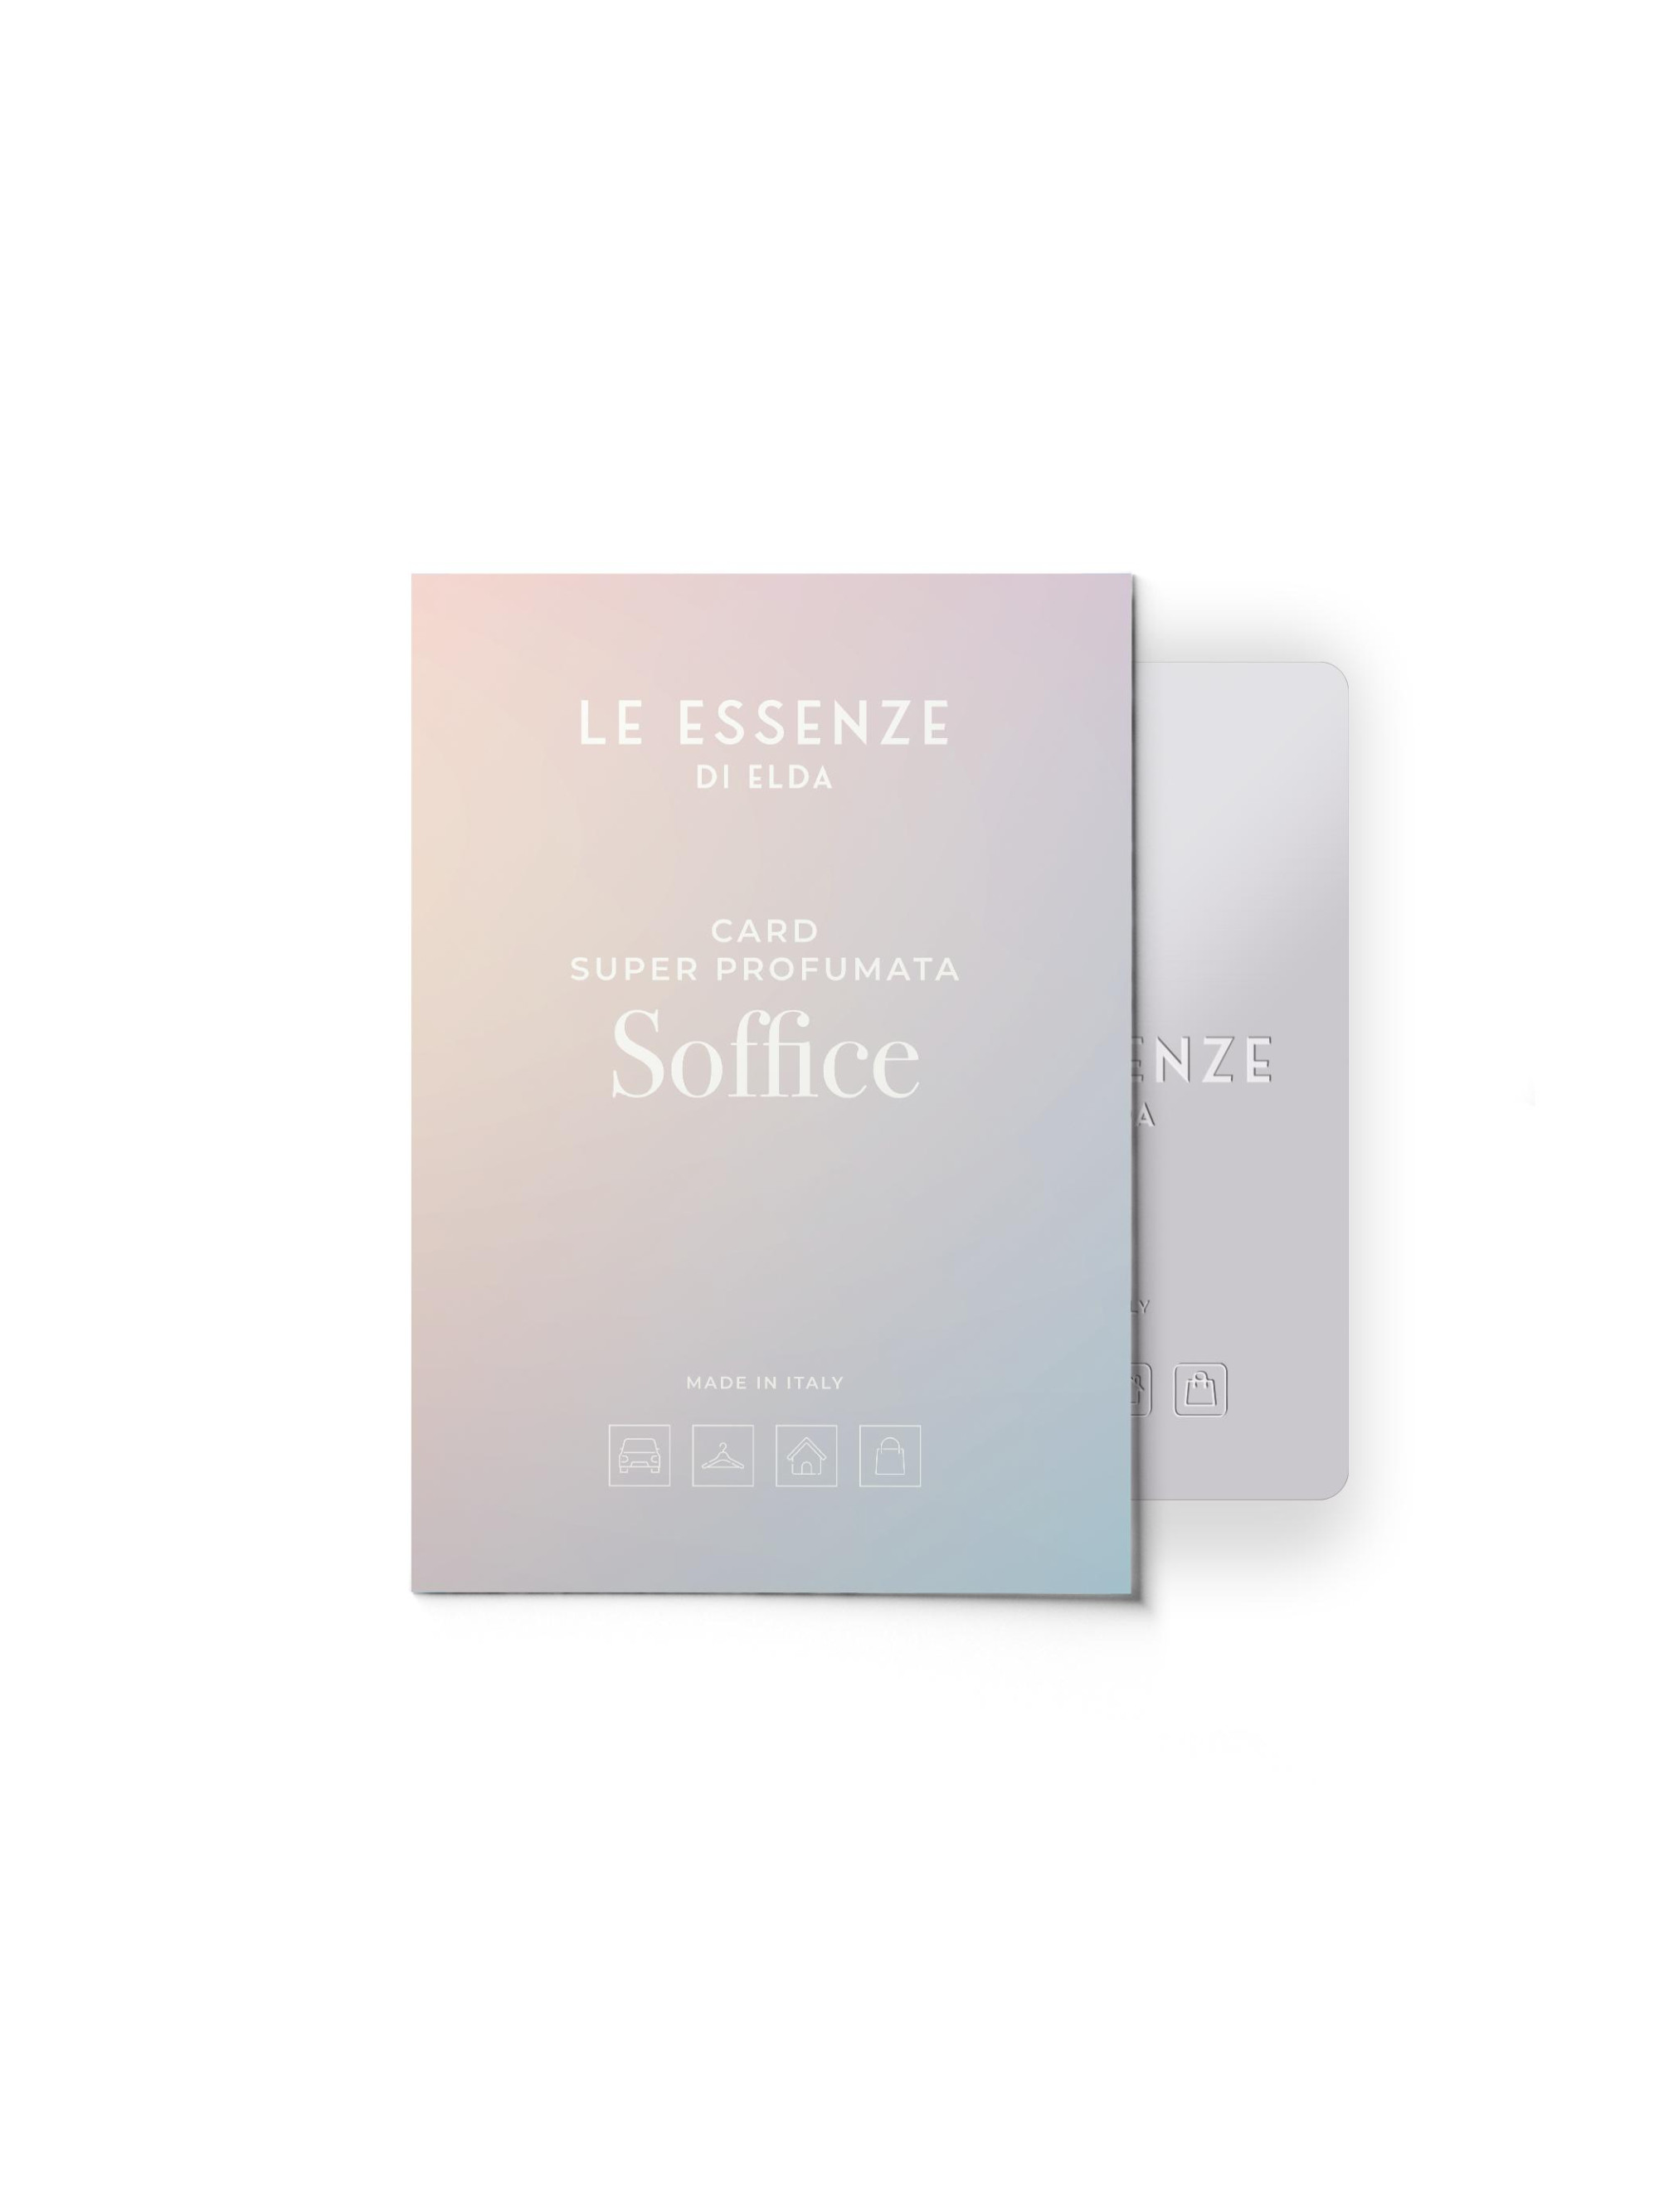 Super scented card Soffice